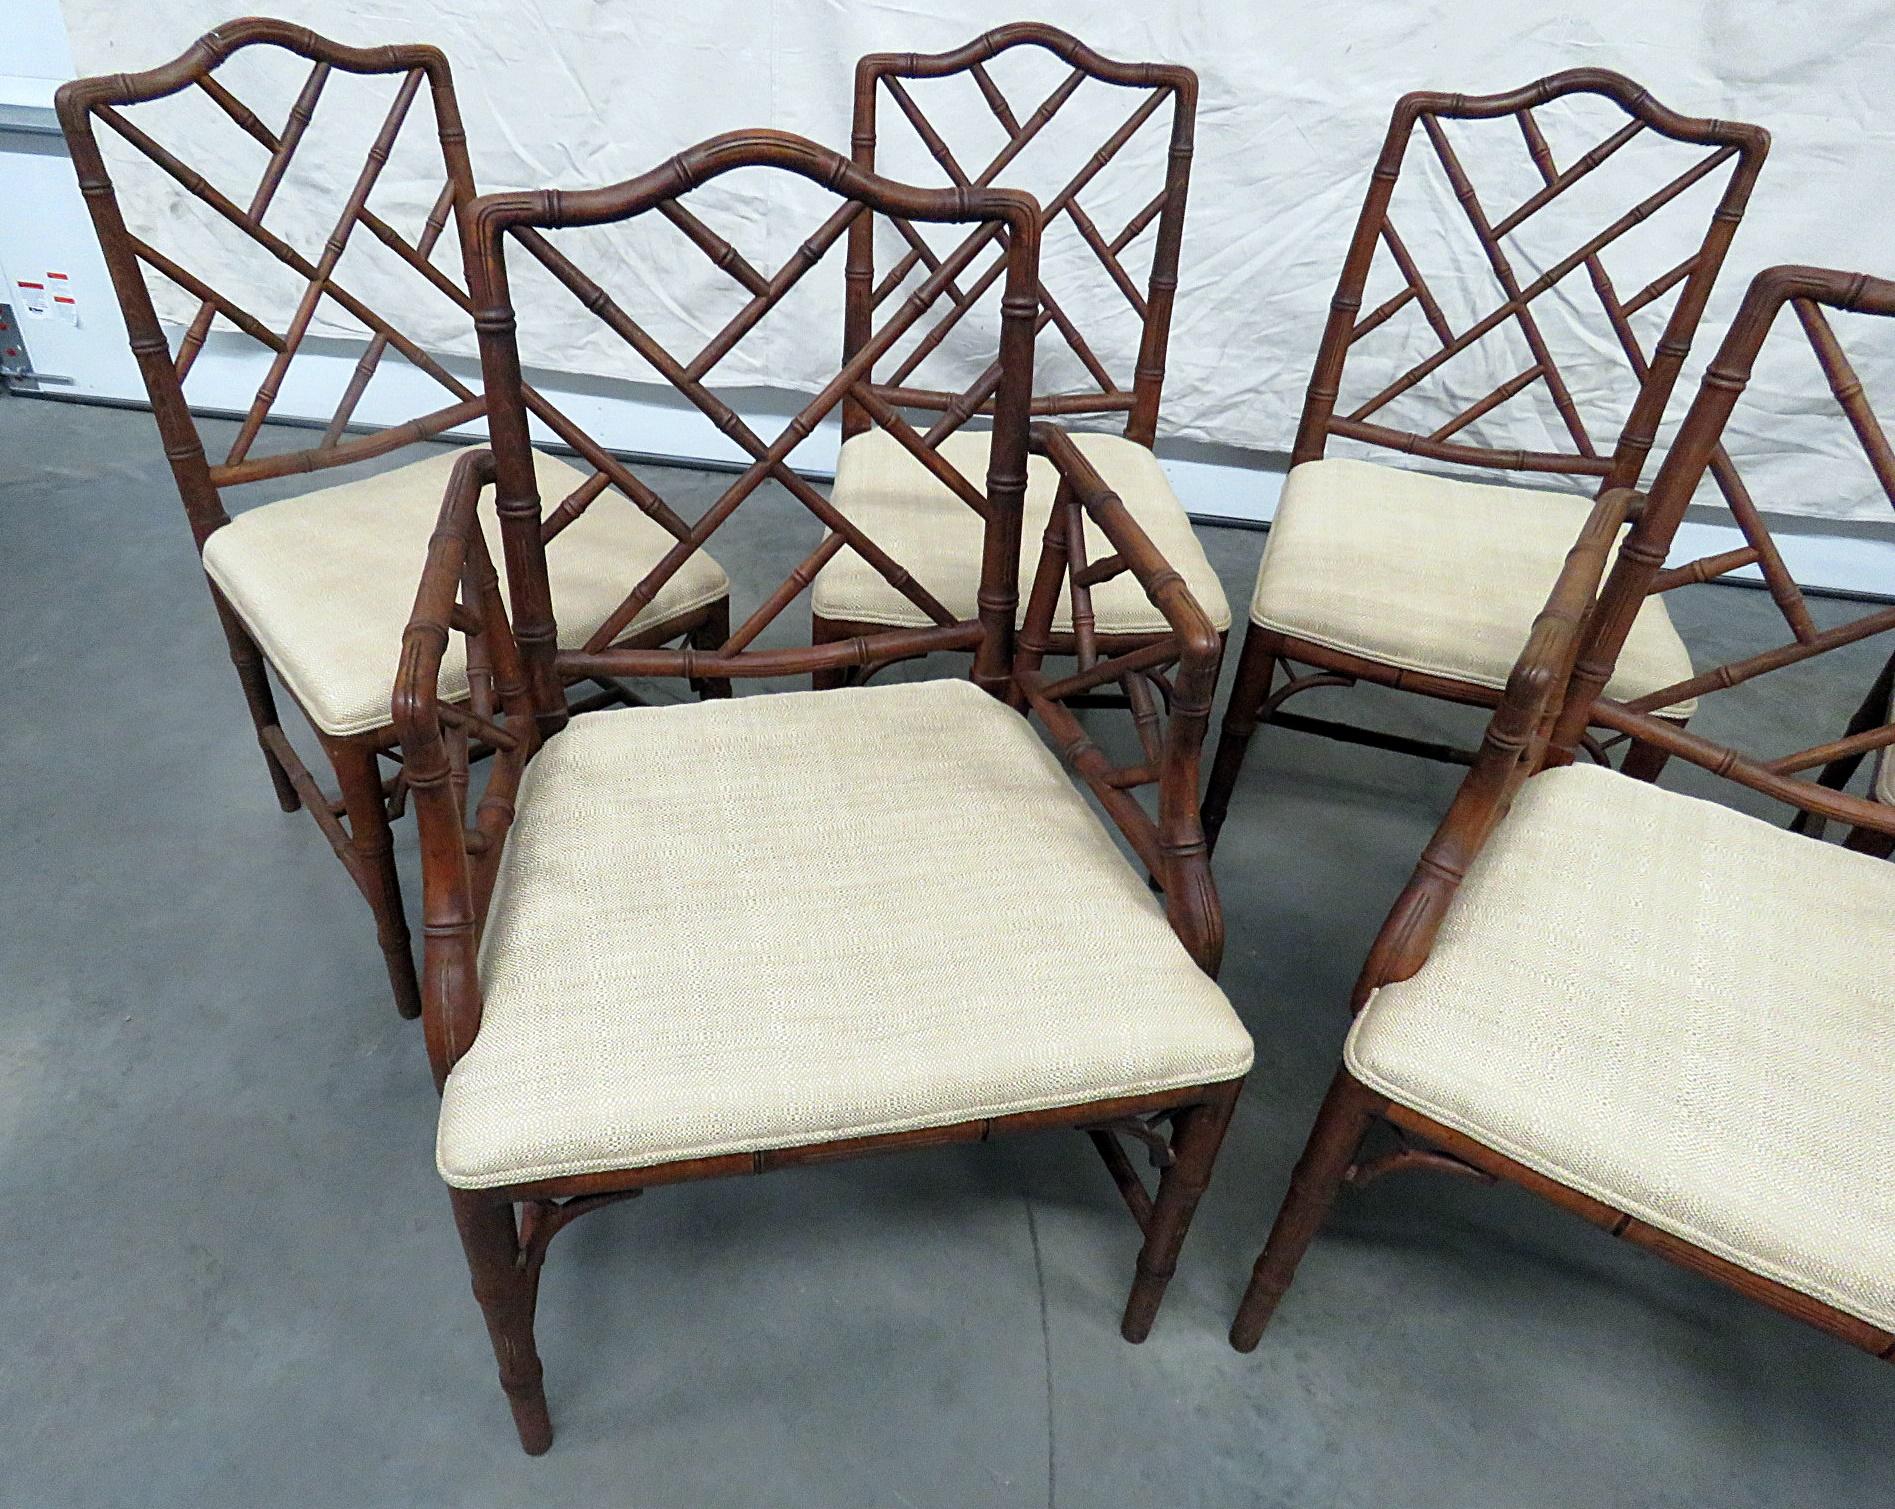 Set of 6 faux bamboo dining chairs. The 4 side chairs measure 37